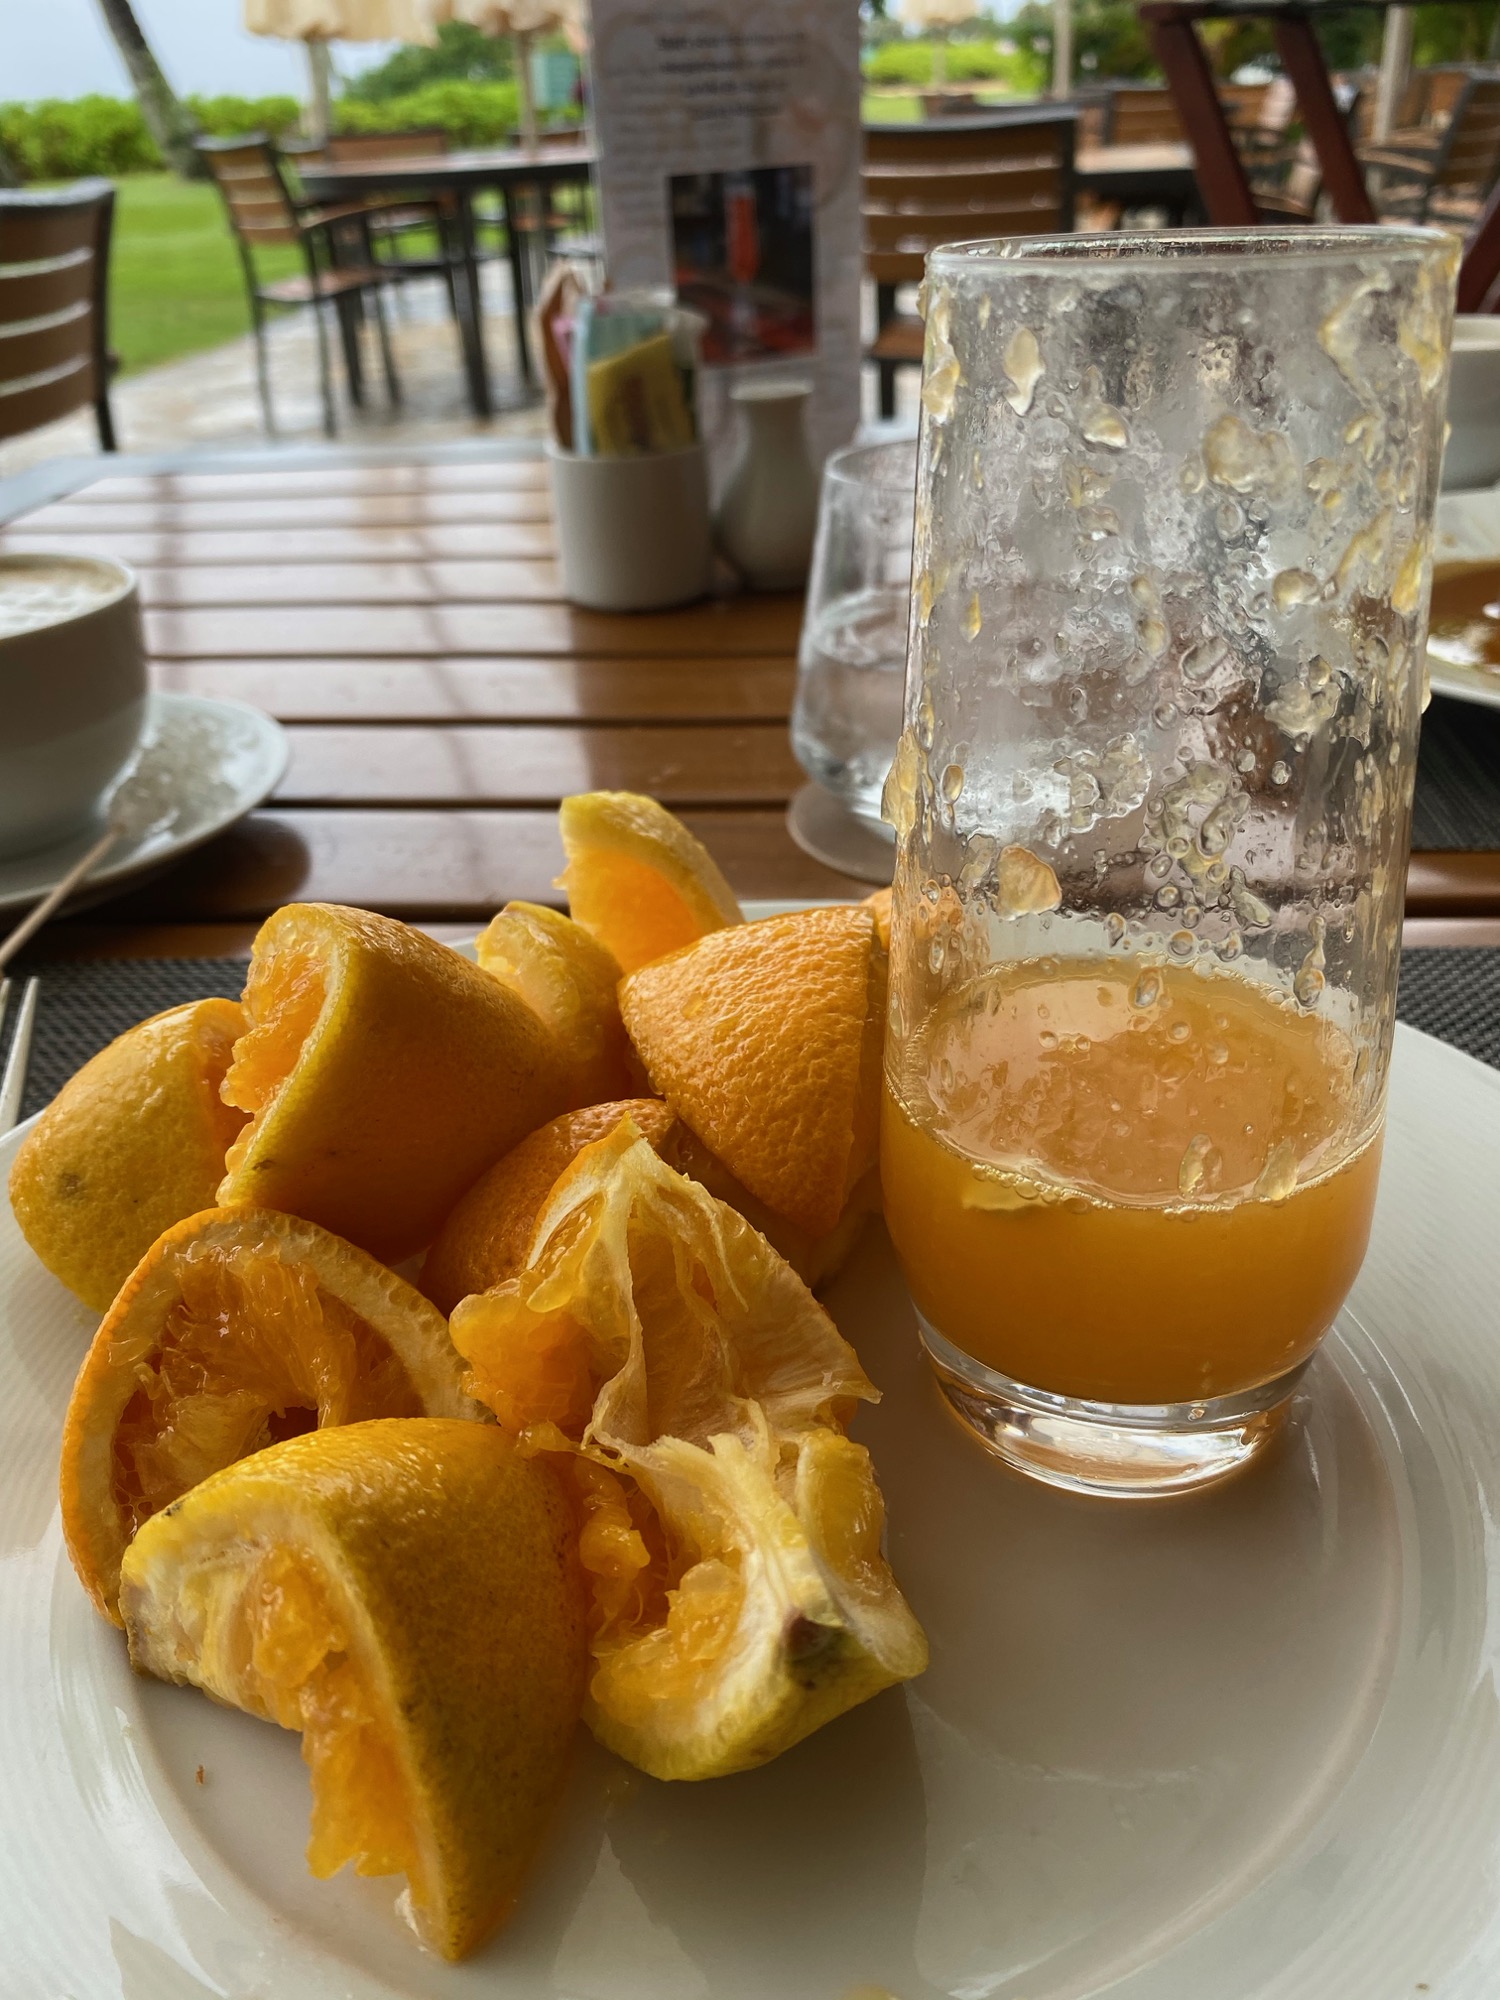 a plate of oranges and a glass of juice